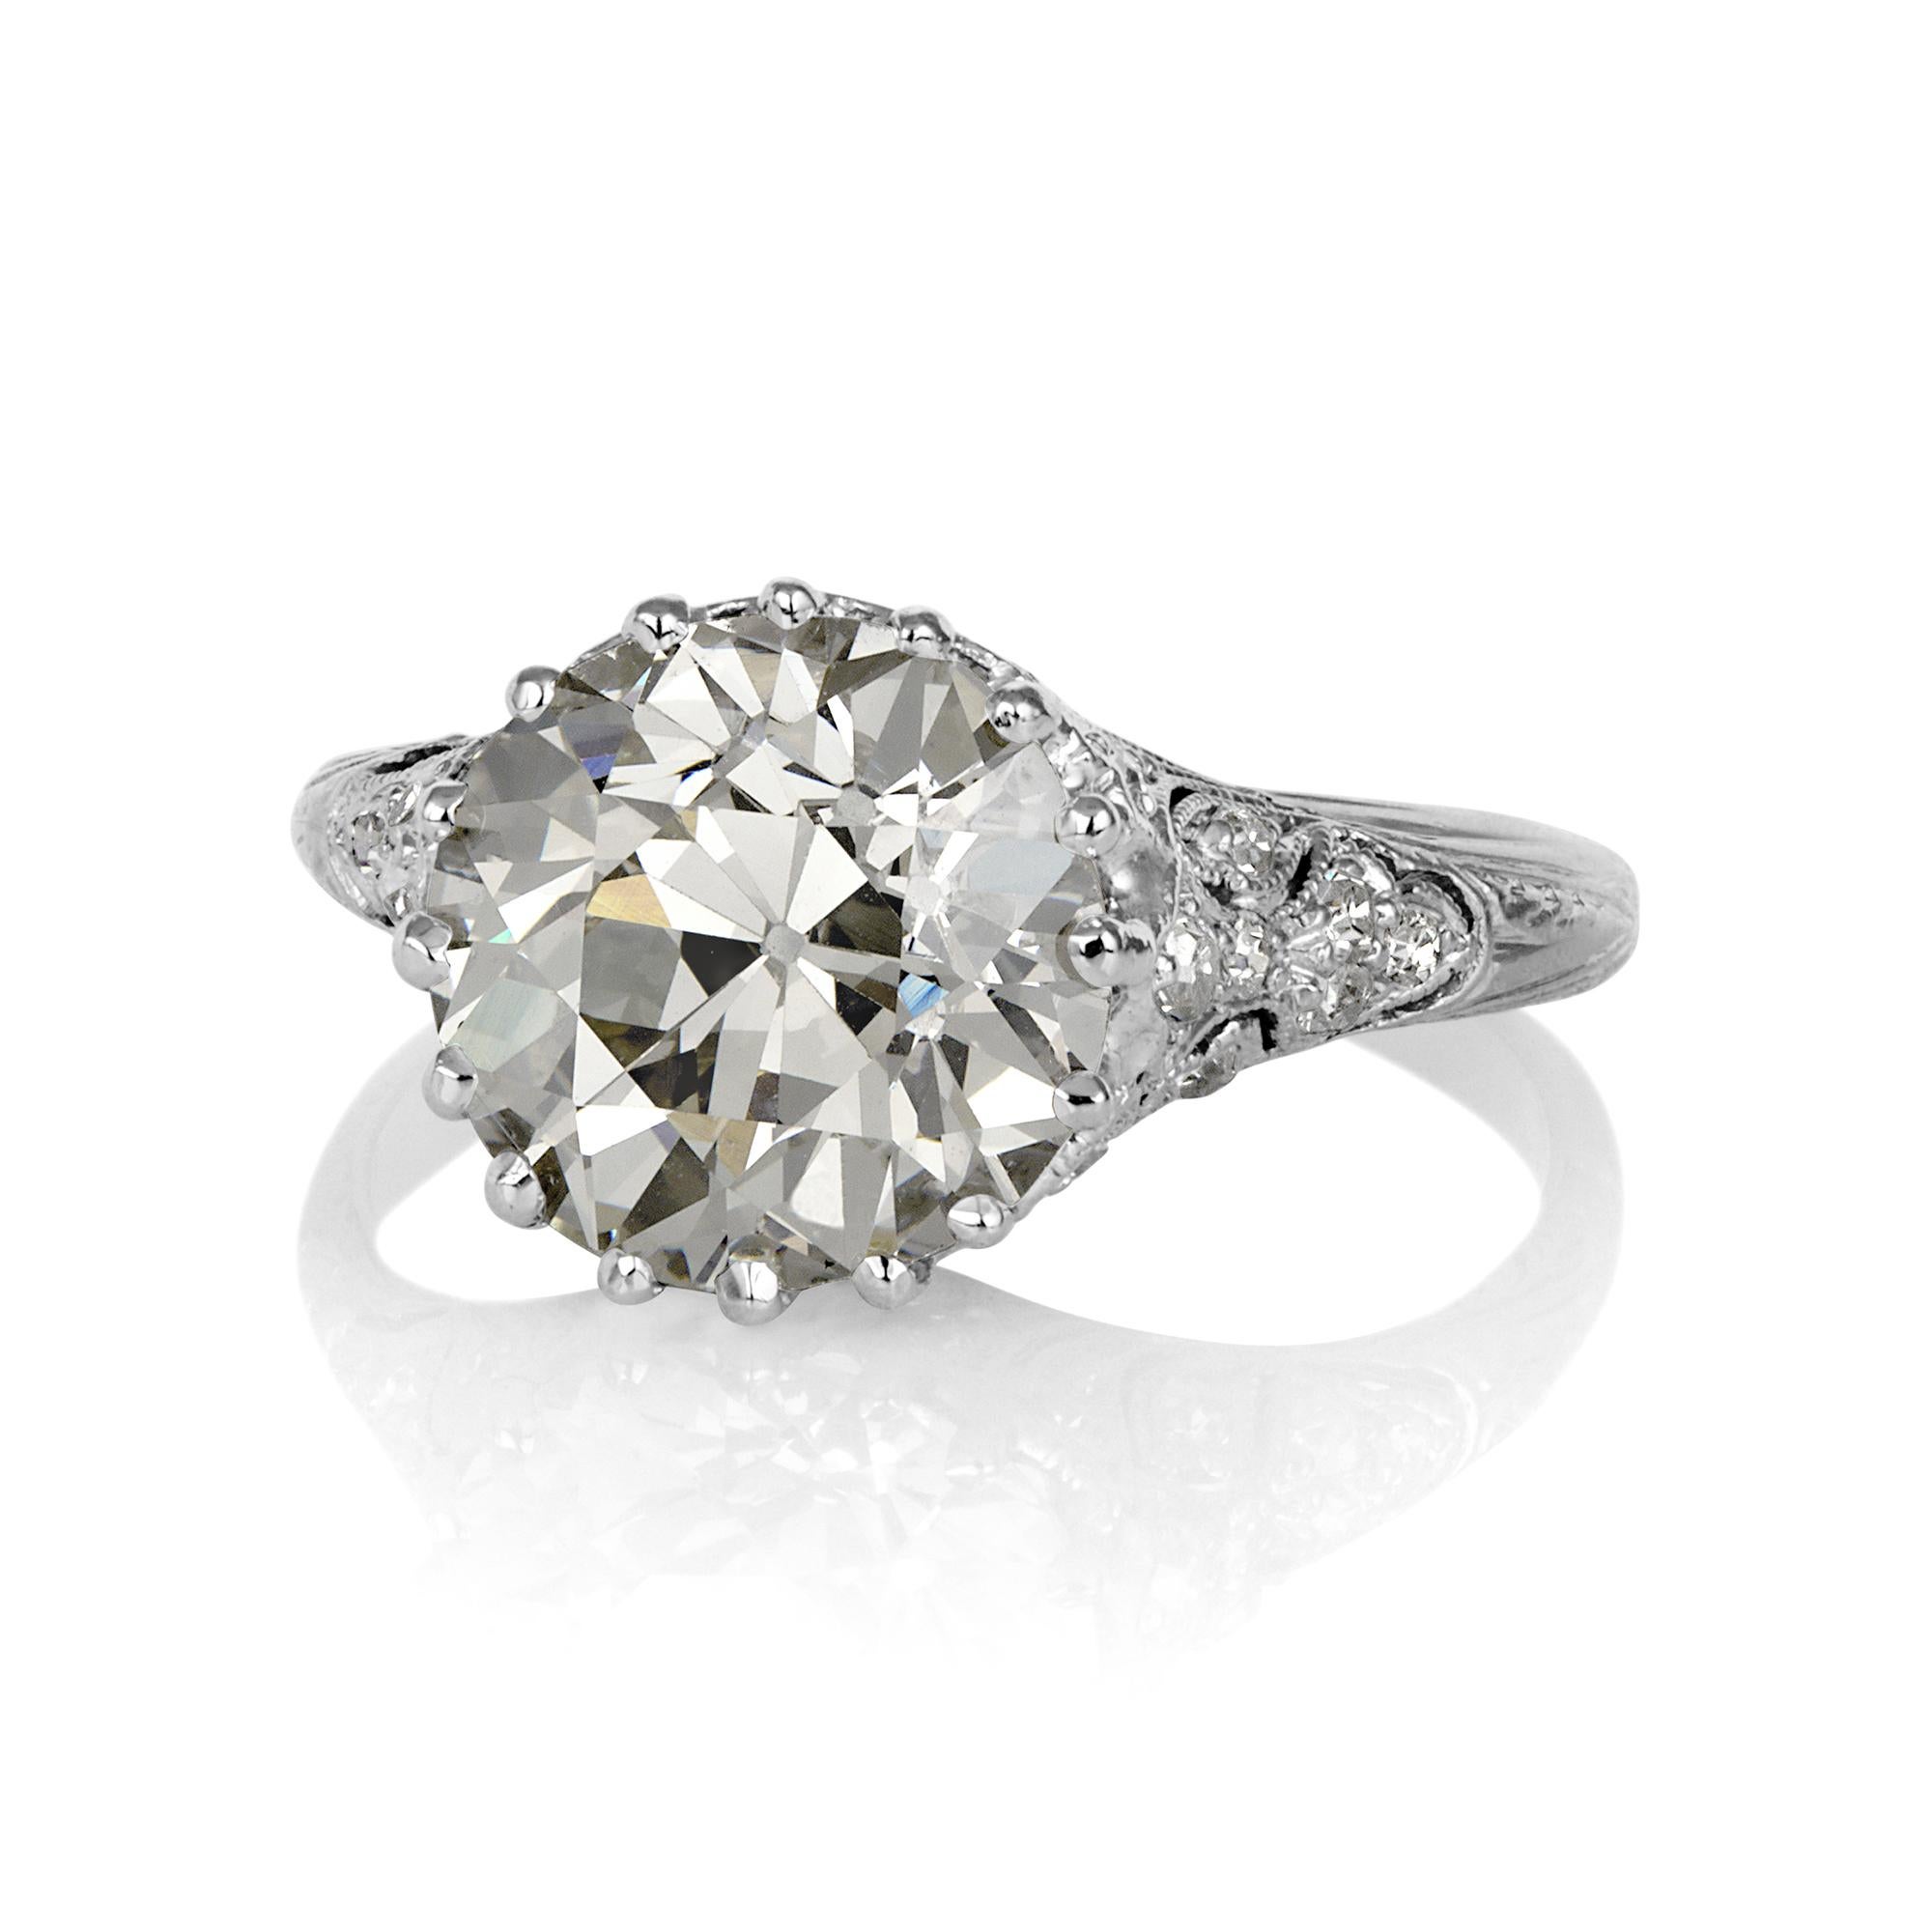 Edwardian GIA Shy 4.0ctw OLD EUROPEAN Diamond Engagement Antique Platinum Ring

Edwardian Rings represent some of the finest examples of diamond, platinum jewelry in existence. Edwardian Diamond jewels were made to look as light and delicate as